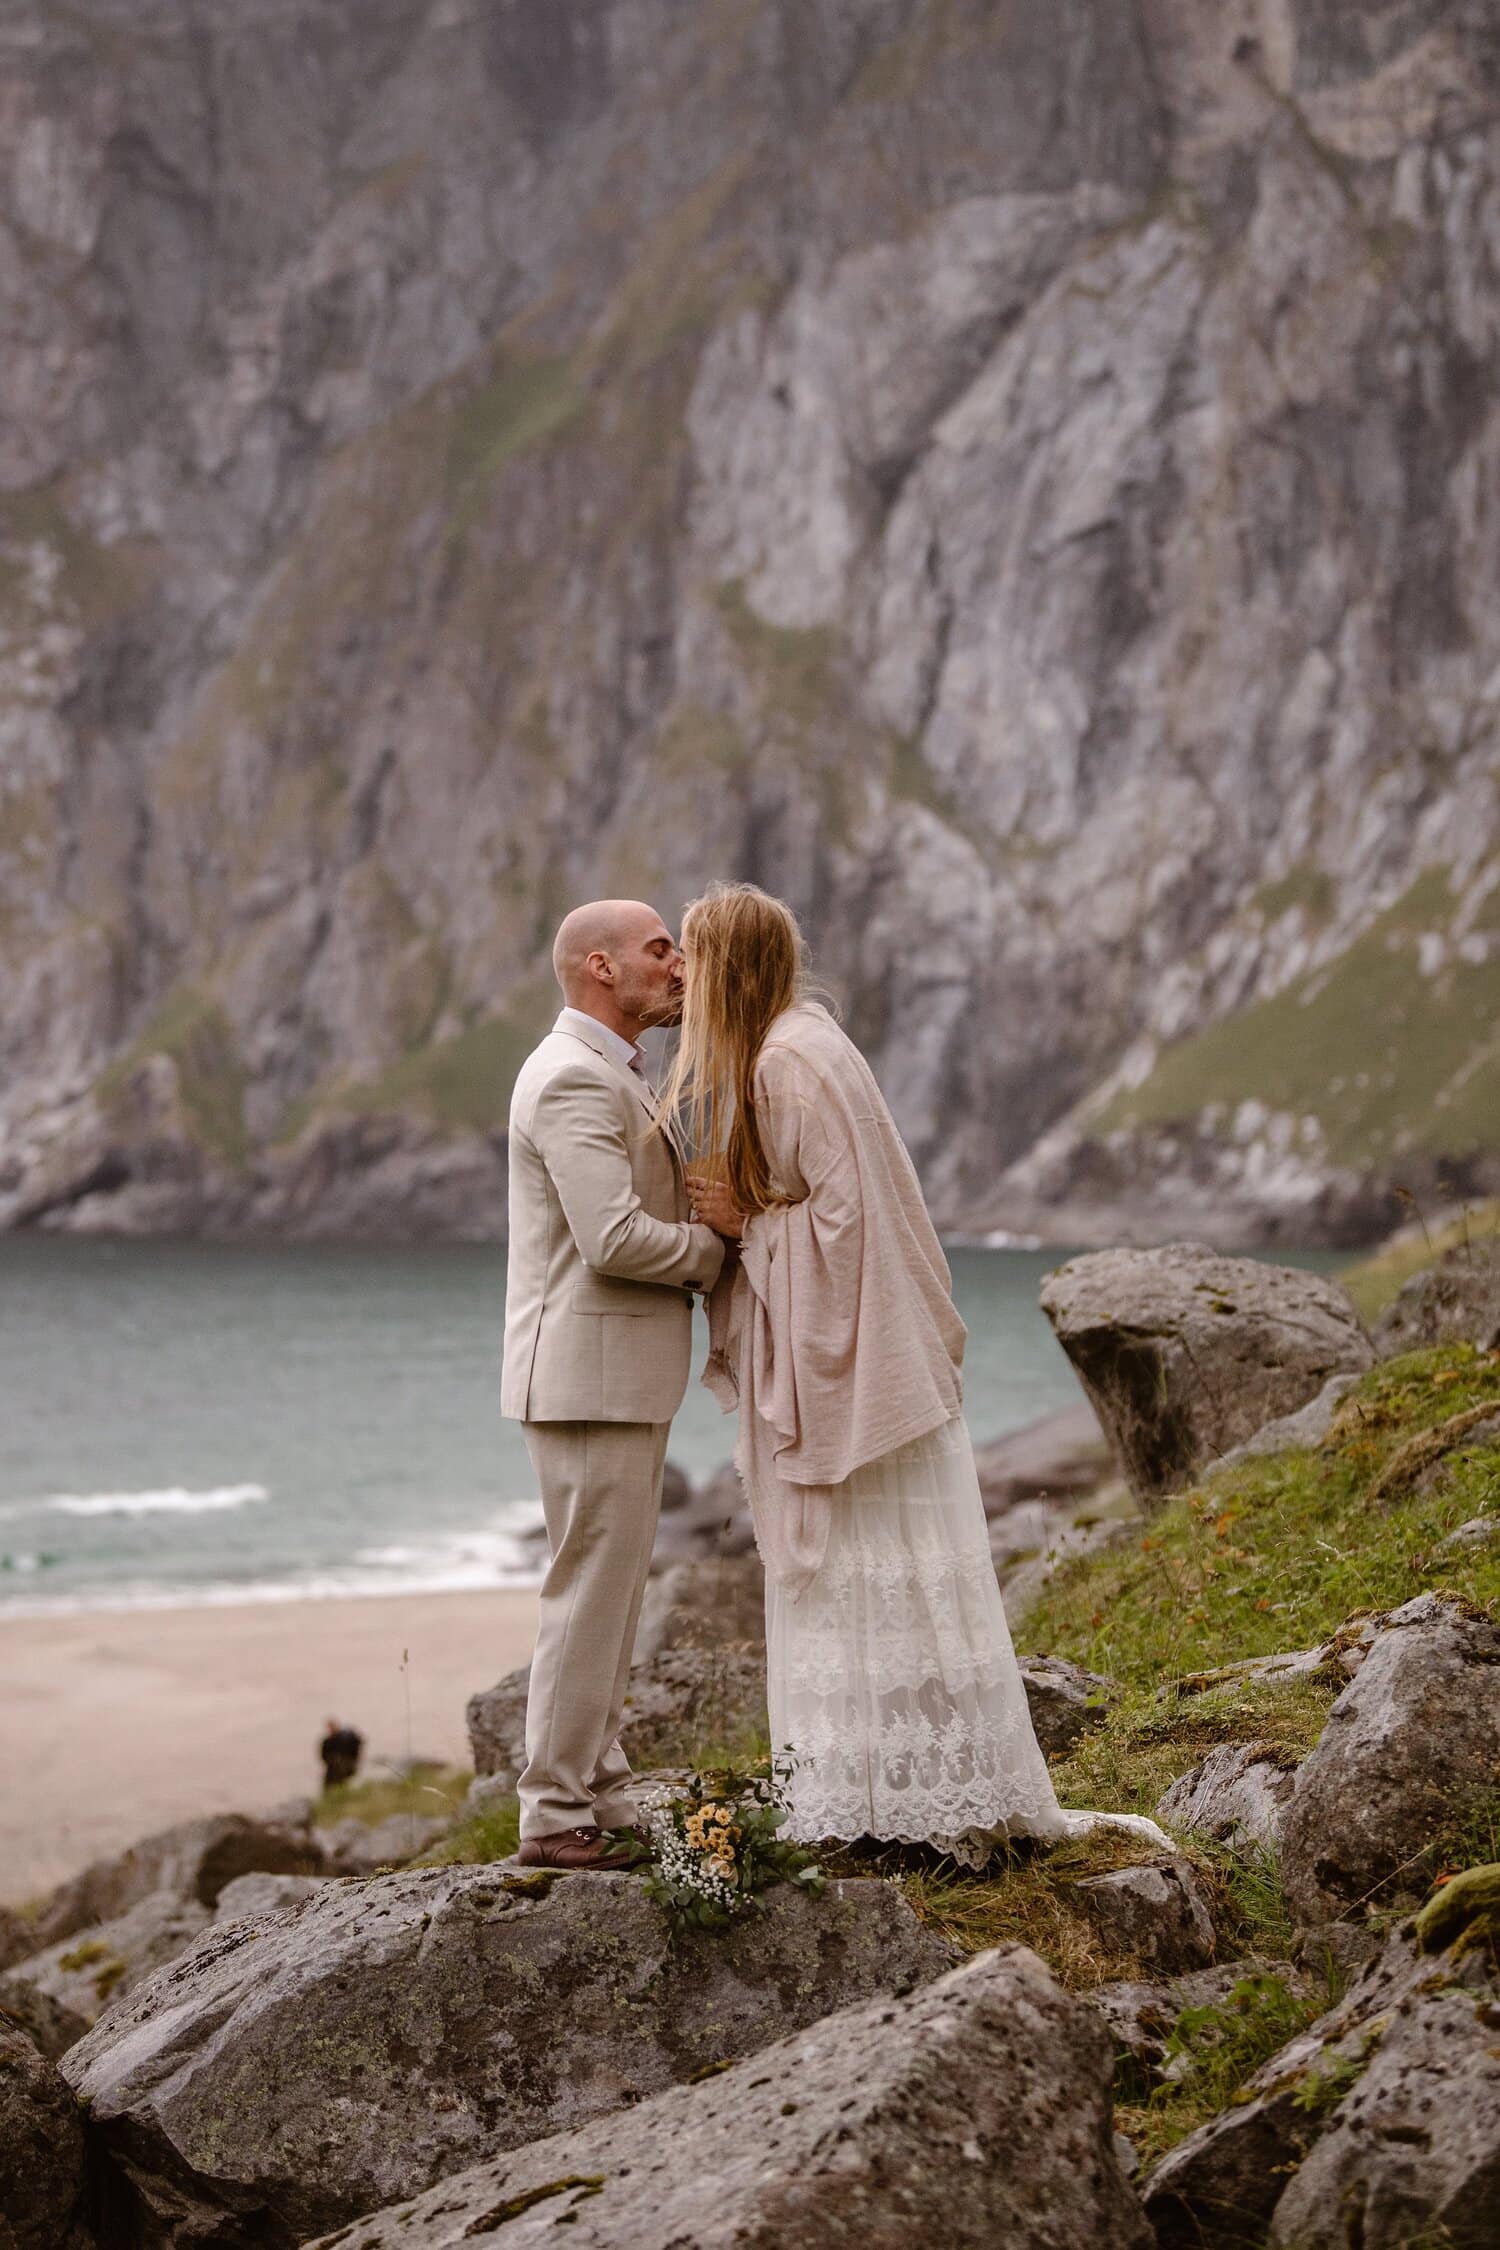 Bride and groom kiss during their intimate elopement ceremony on a beach in Norway. There are mountains in the background.